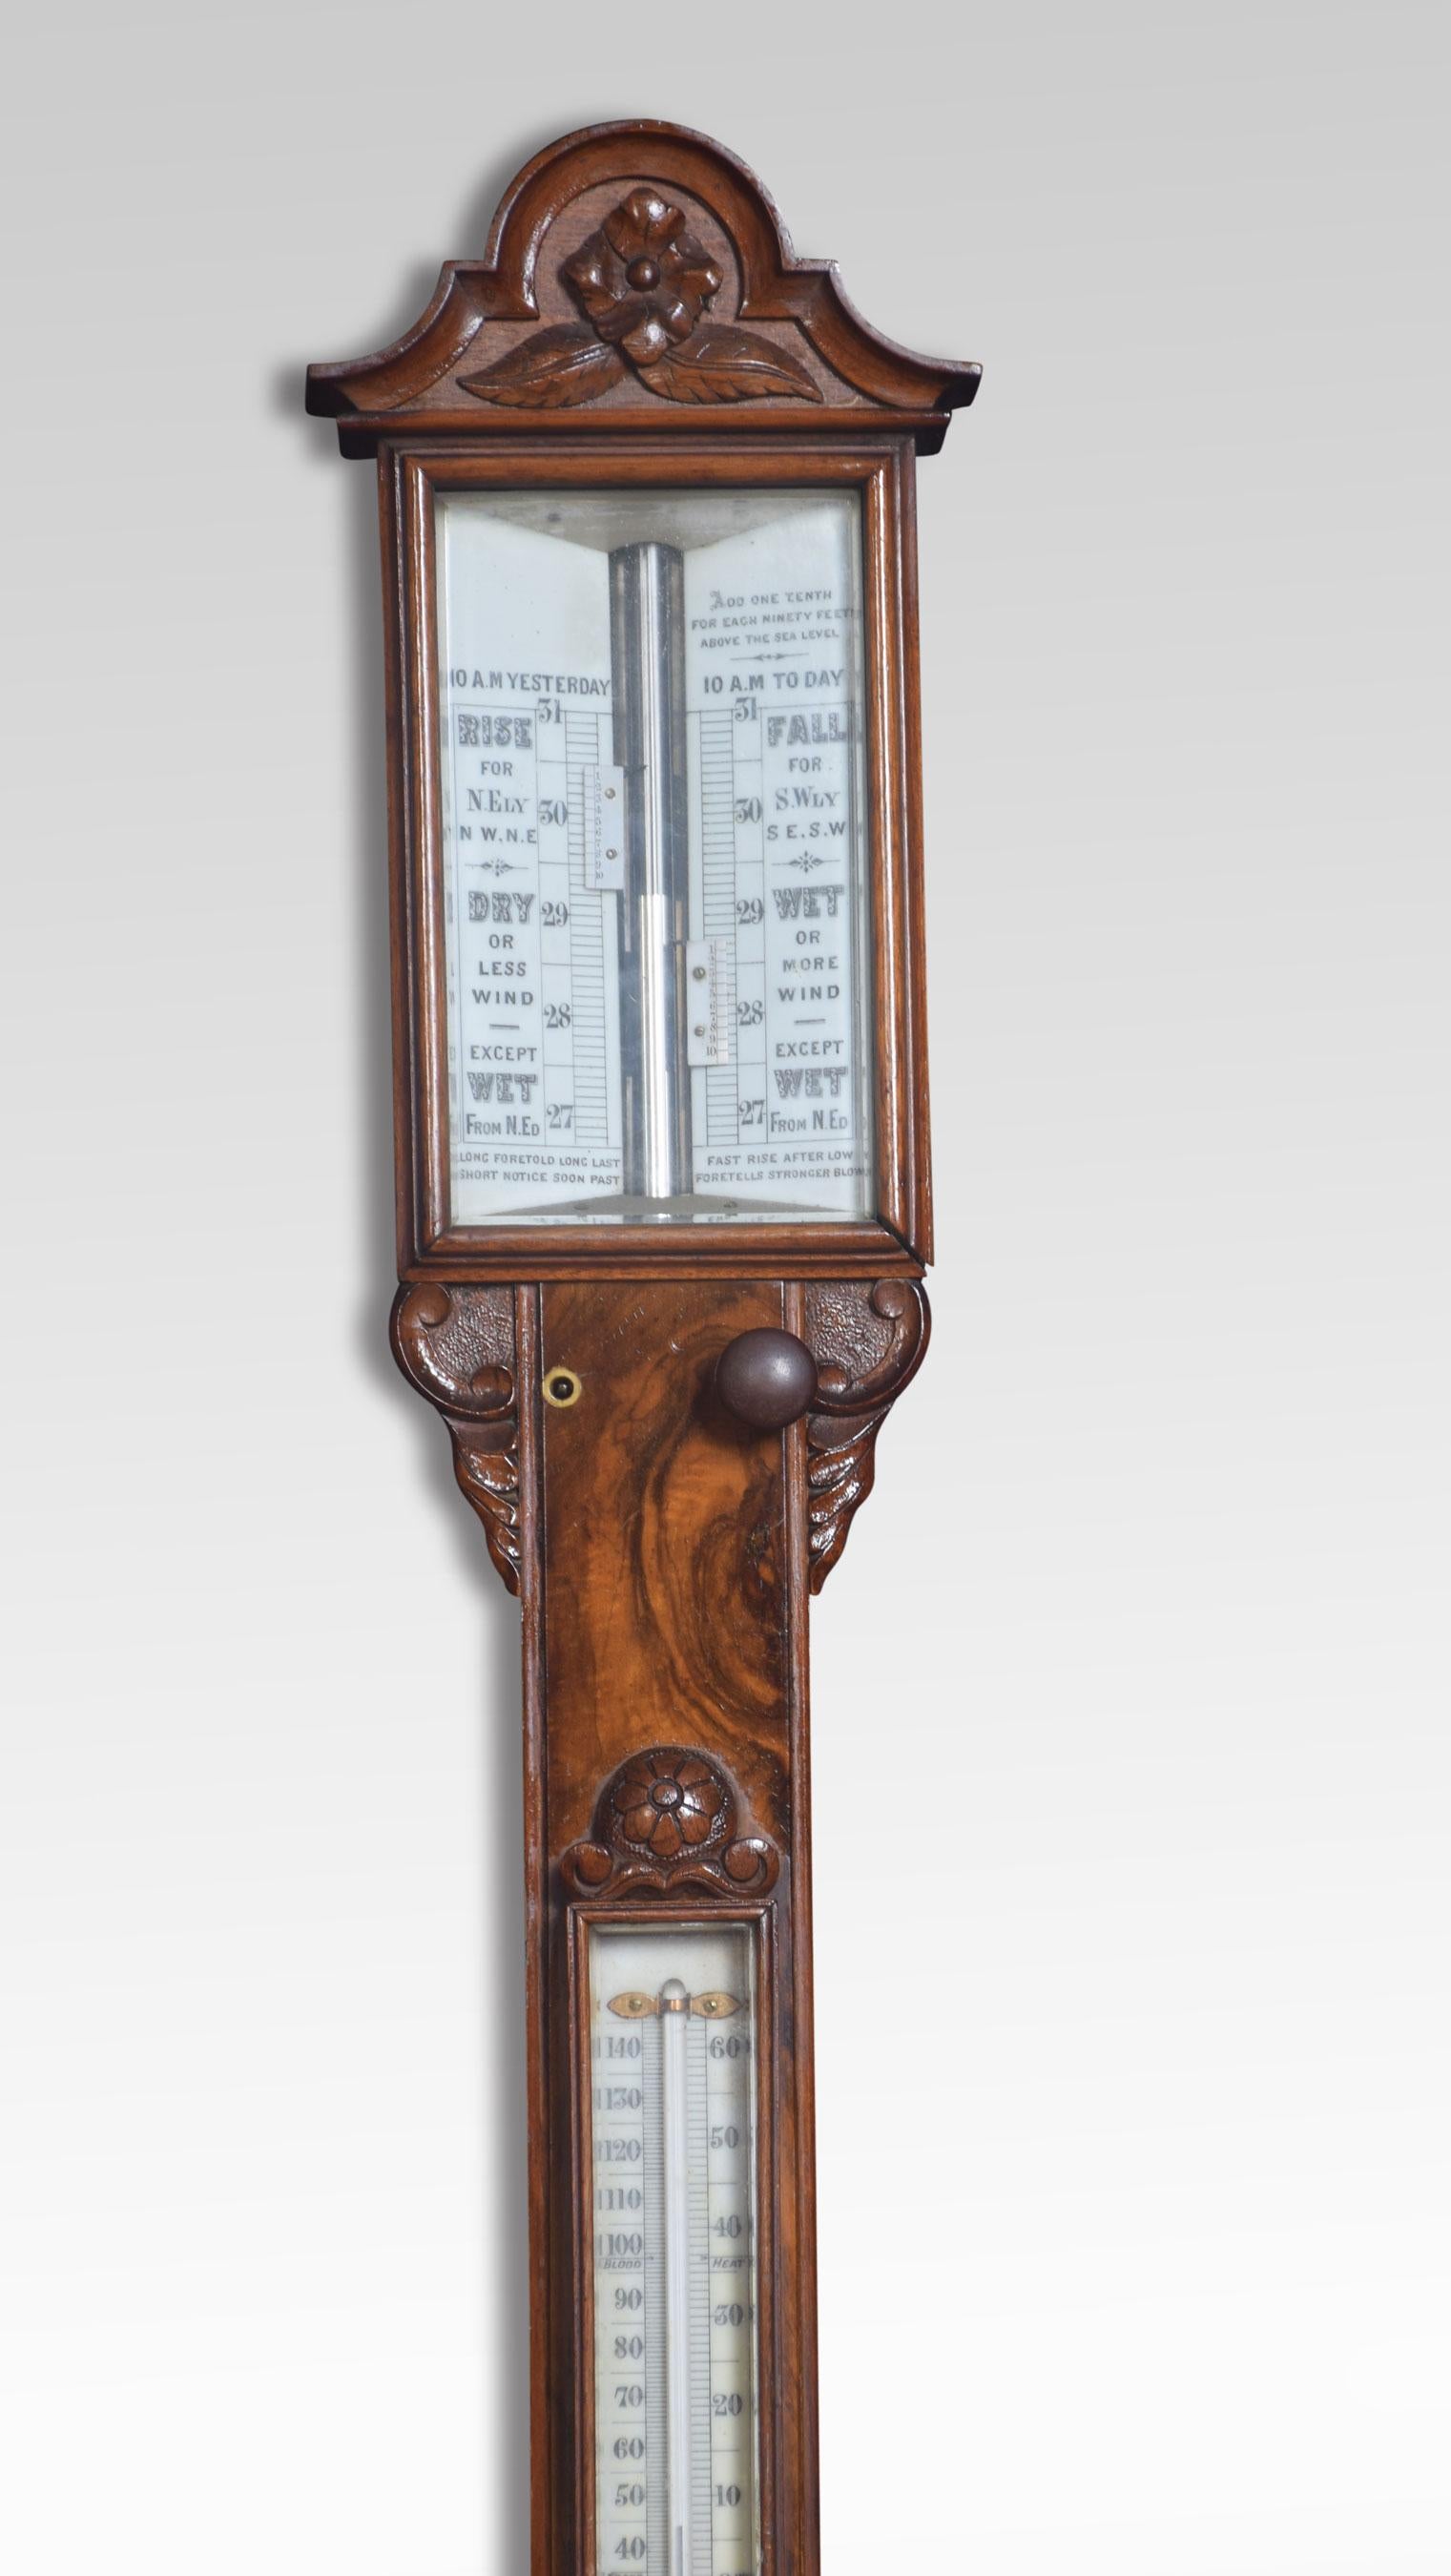 Late 19th century walnut cased stick barometer and thermometer, with engraved scales contained in figured walnut case having shaped and moulded pediment, and carved cistern cover.
Dimensions
Height 40 inches
Width 6.5 inches
Depth 3 inches.